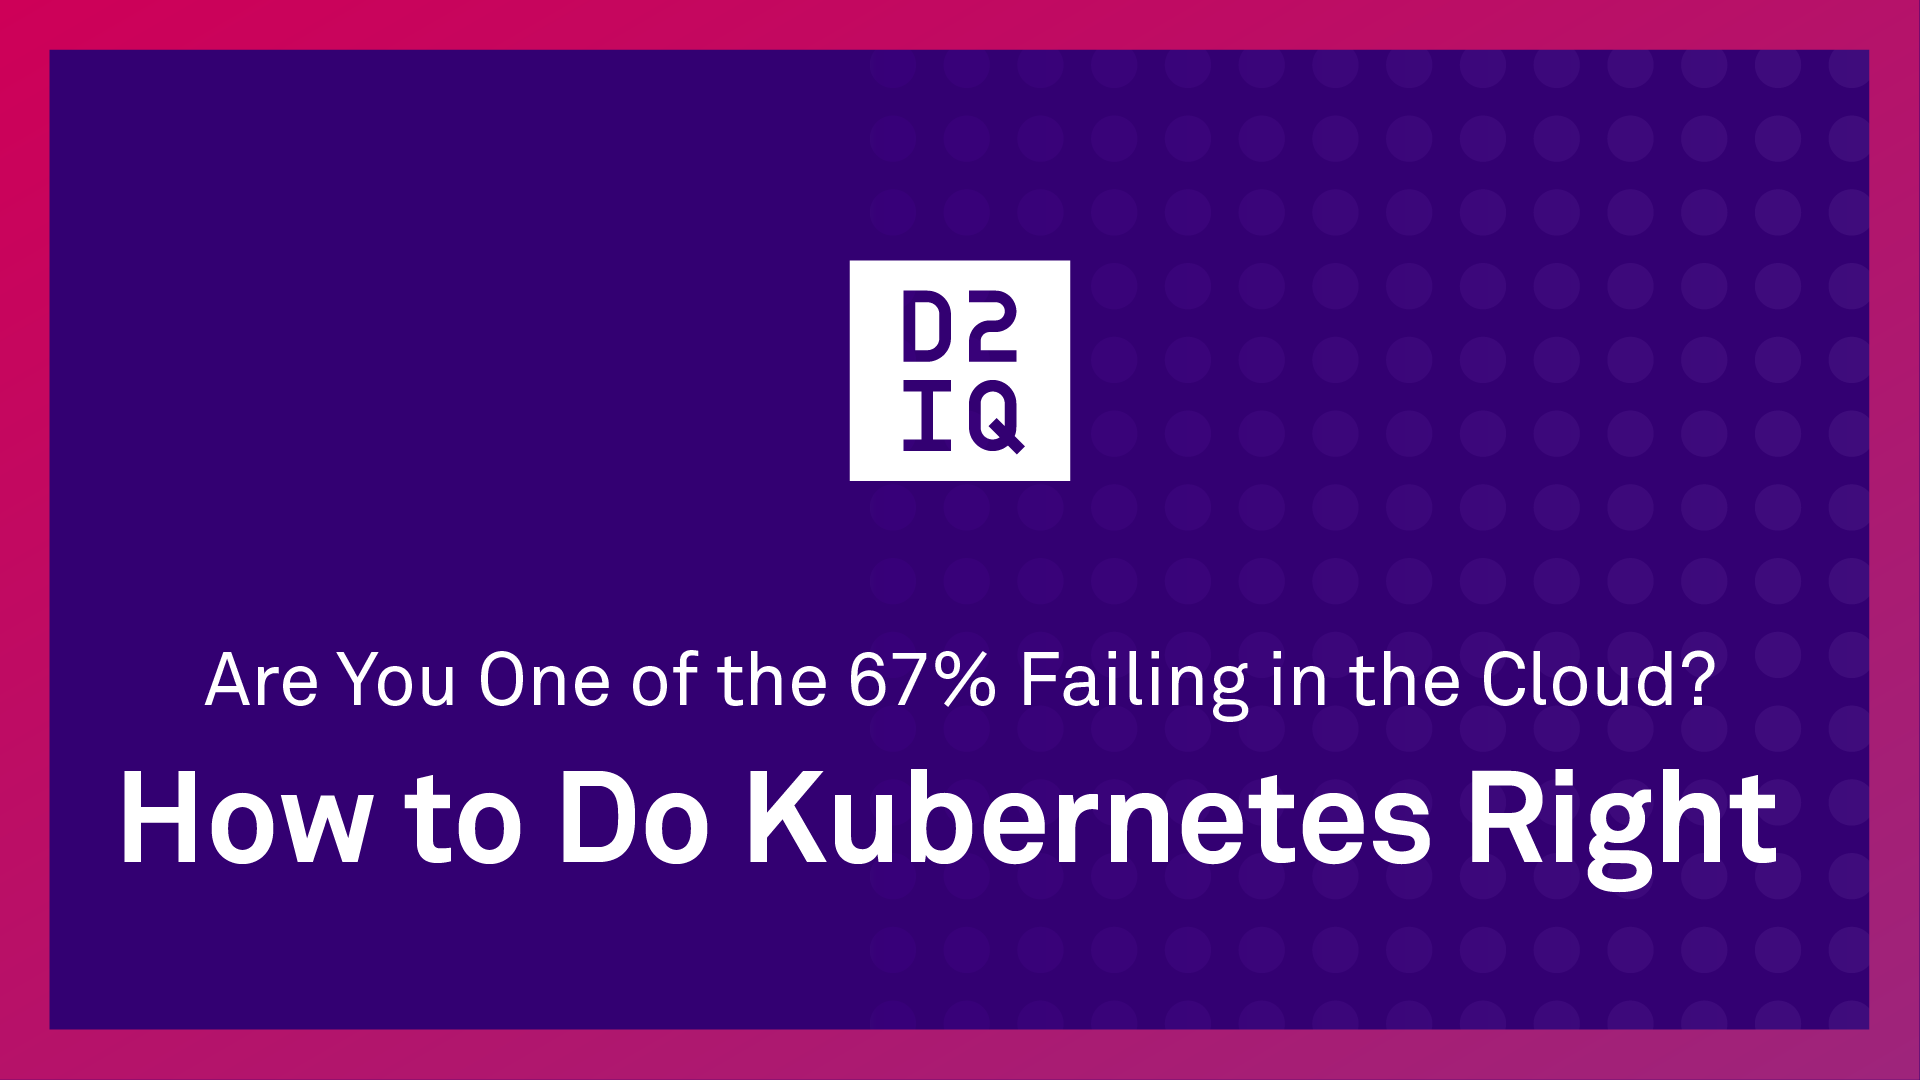 Are You One of the 67% Failing in the Cloud? How to Do Kubernetes Right